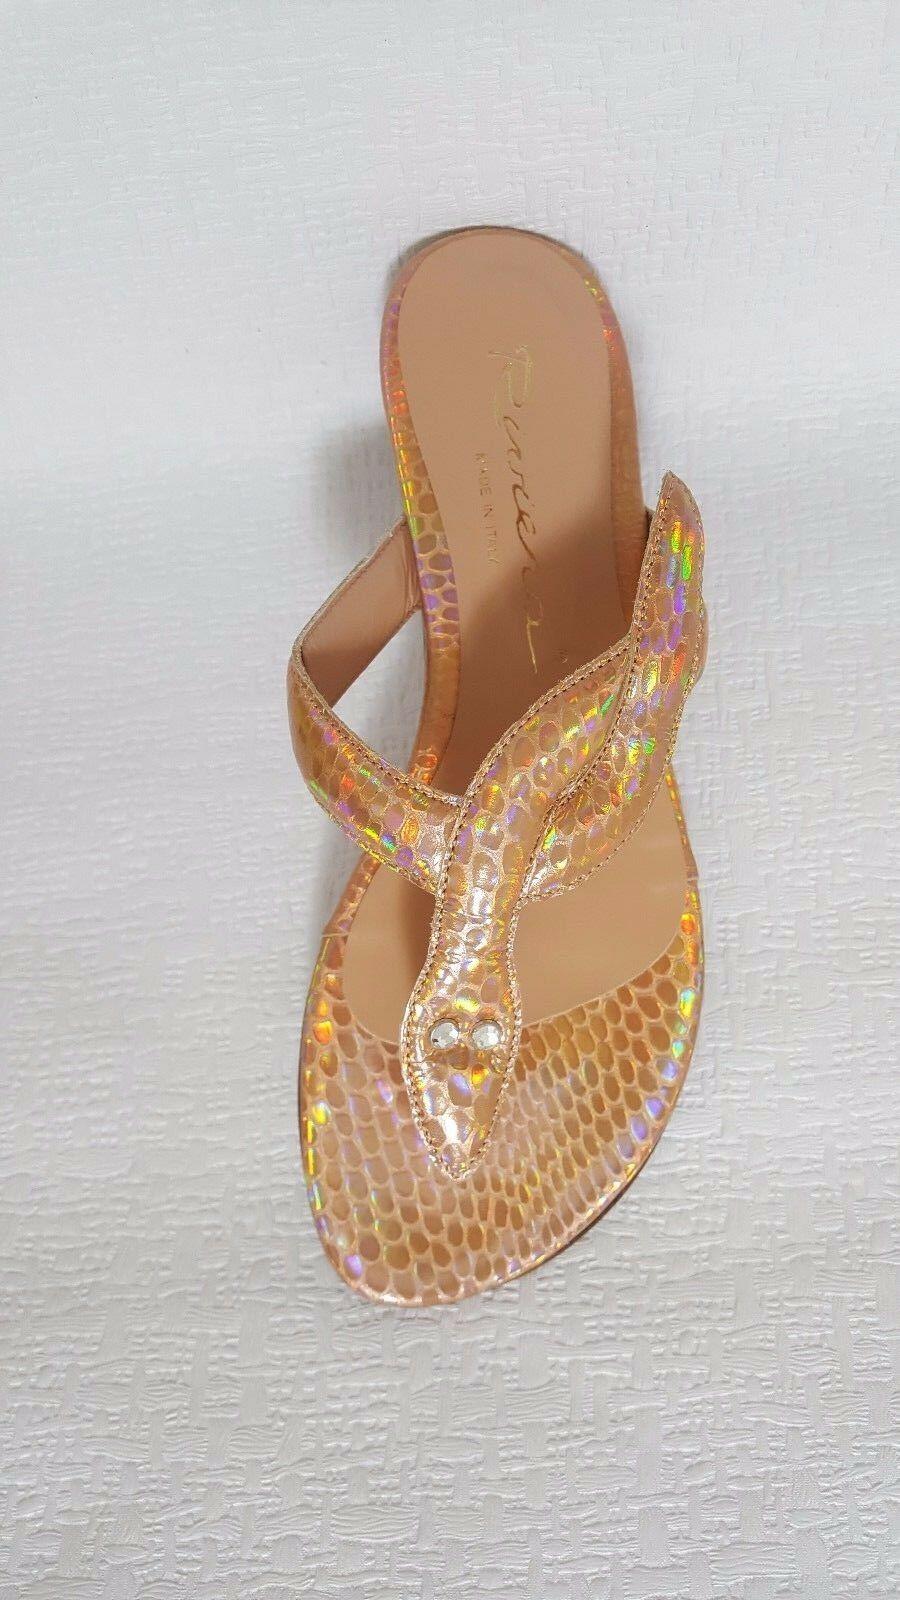 RIVIERA Women's Sandals Leather Gold Cobra Rame MADE in ITALY  EU 36 US 5 - SVNYFancy